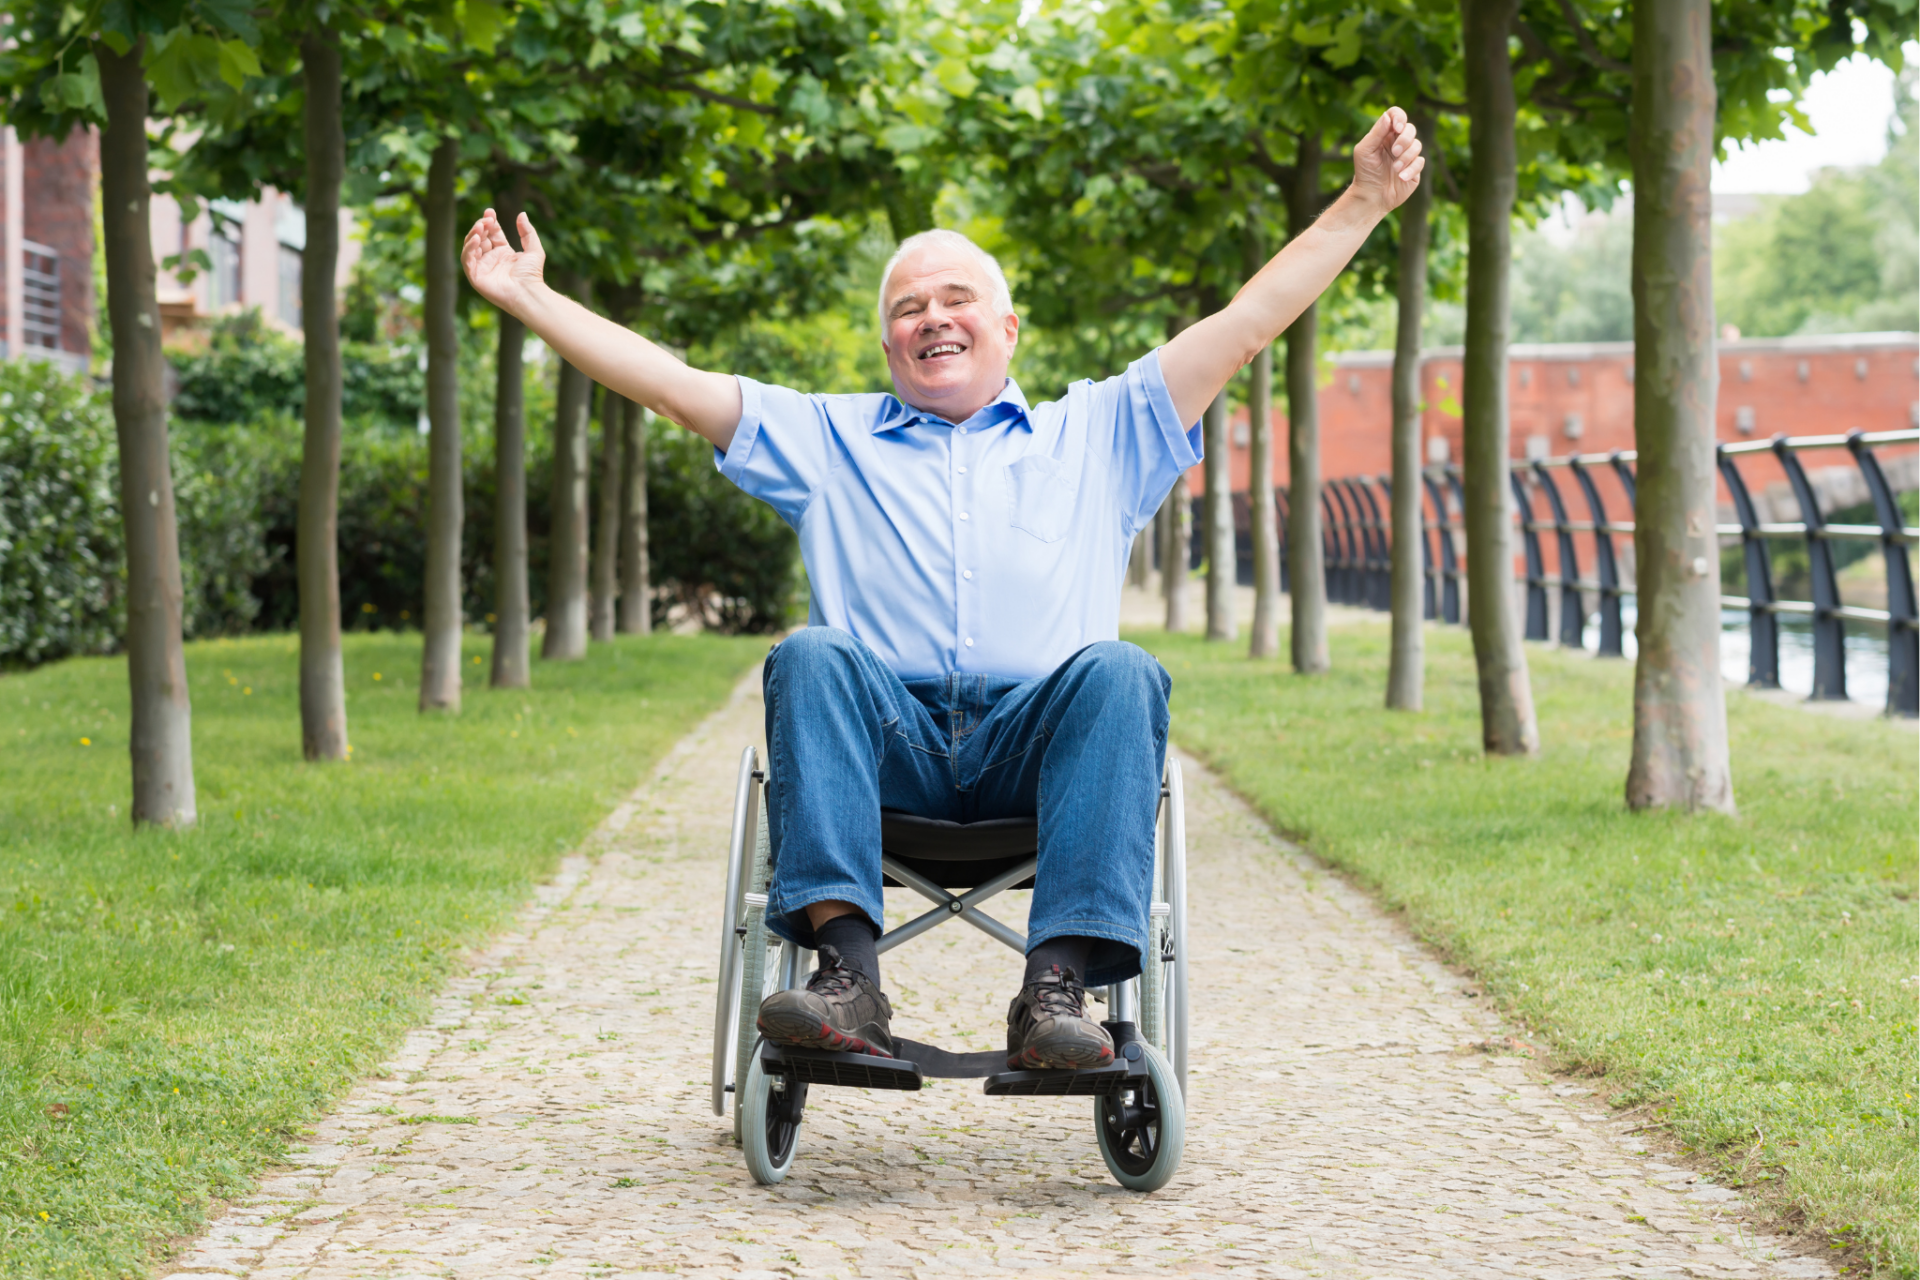 A 40 to 50 year old man sitting a wheelchair with his arms up in joy. The man is outside on a paved path with a line of trees on either side of him.